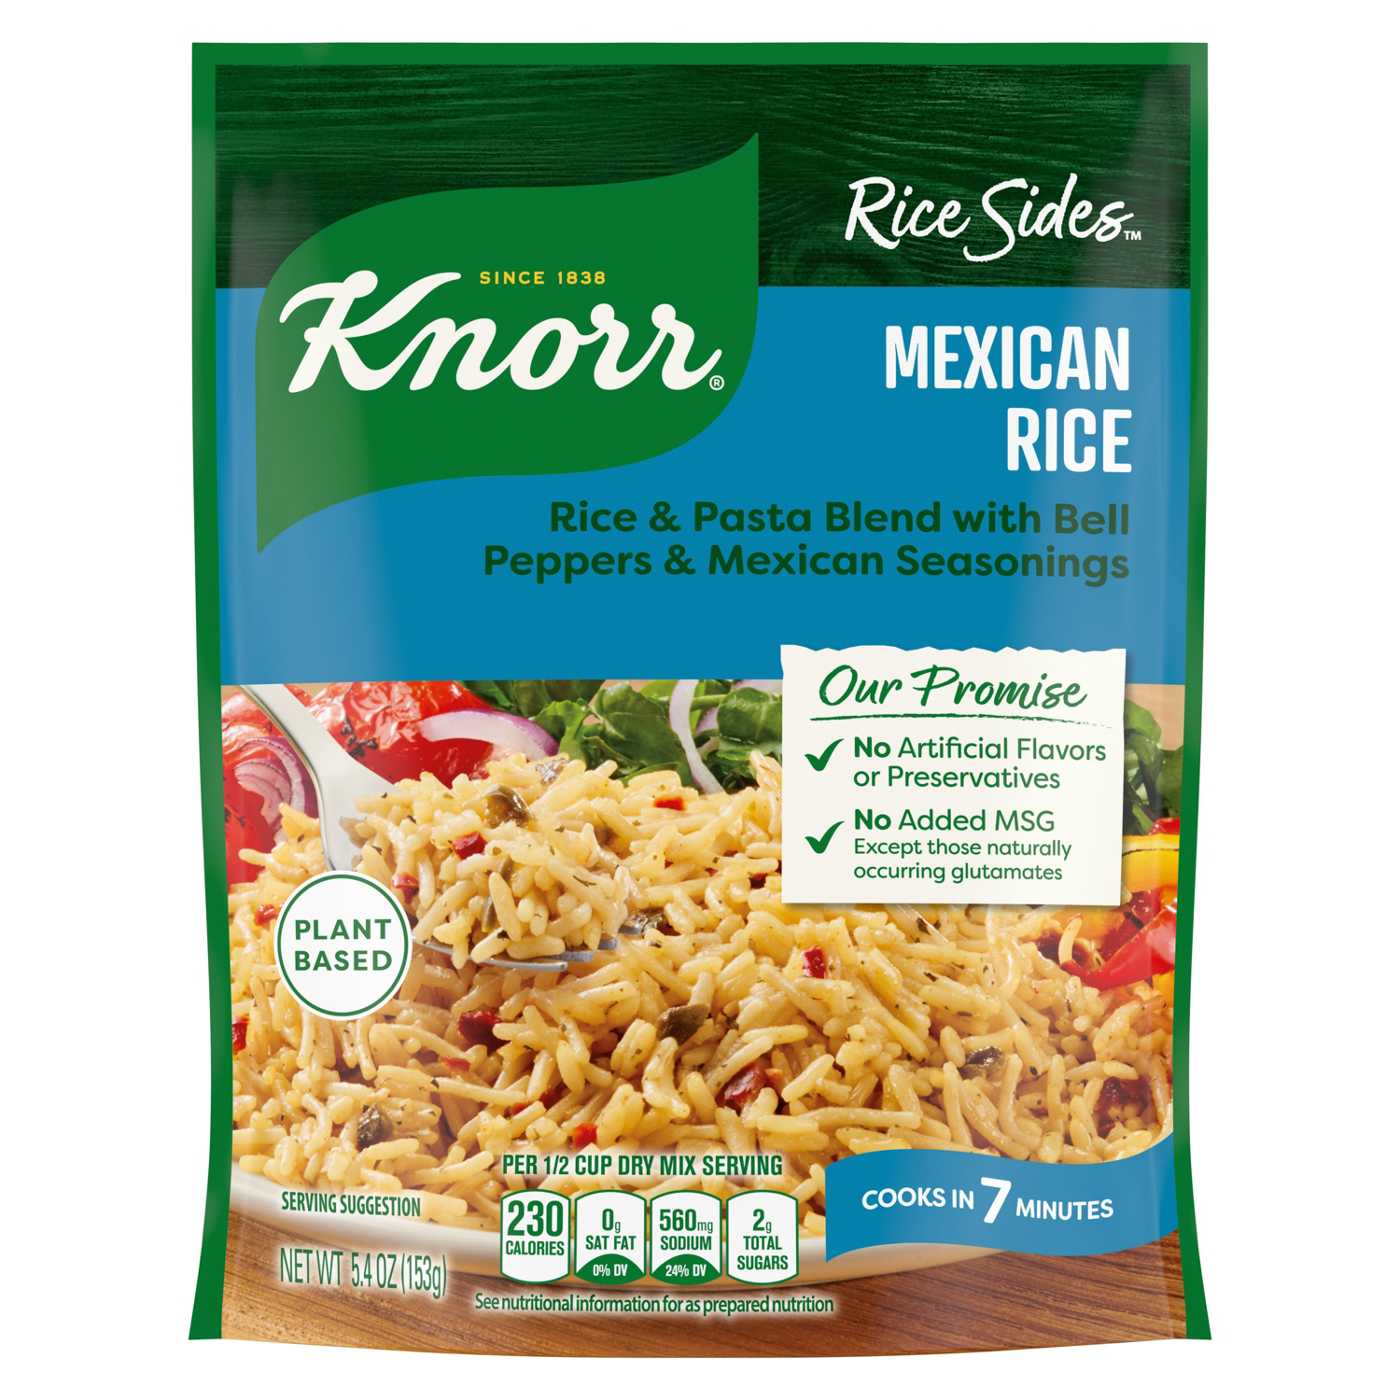 Knorr Rice Sides Mexican Rice; image 1 of 10